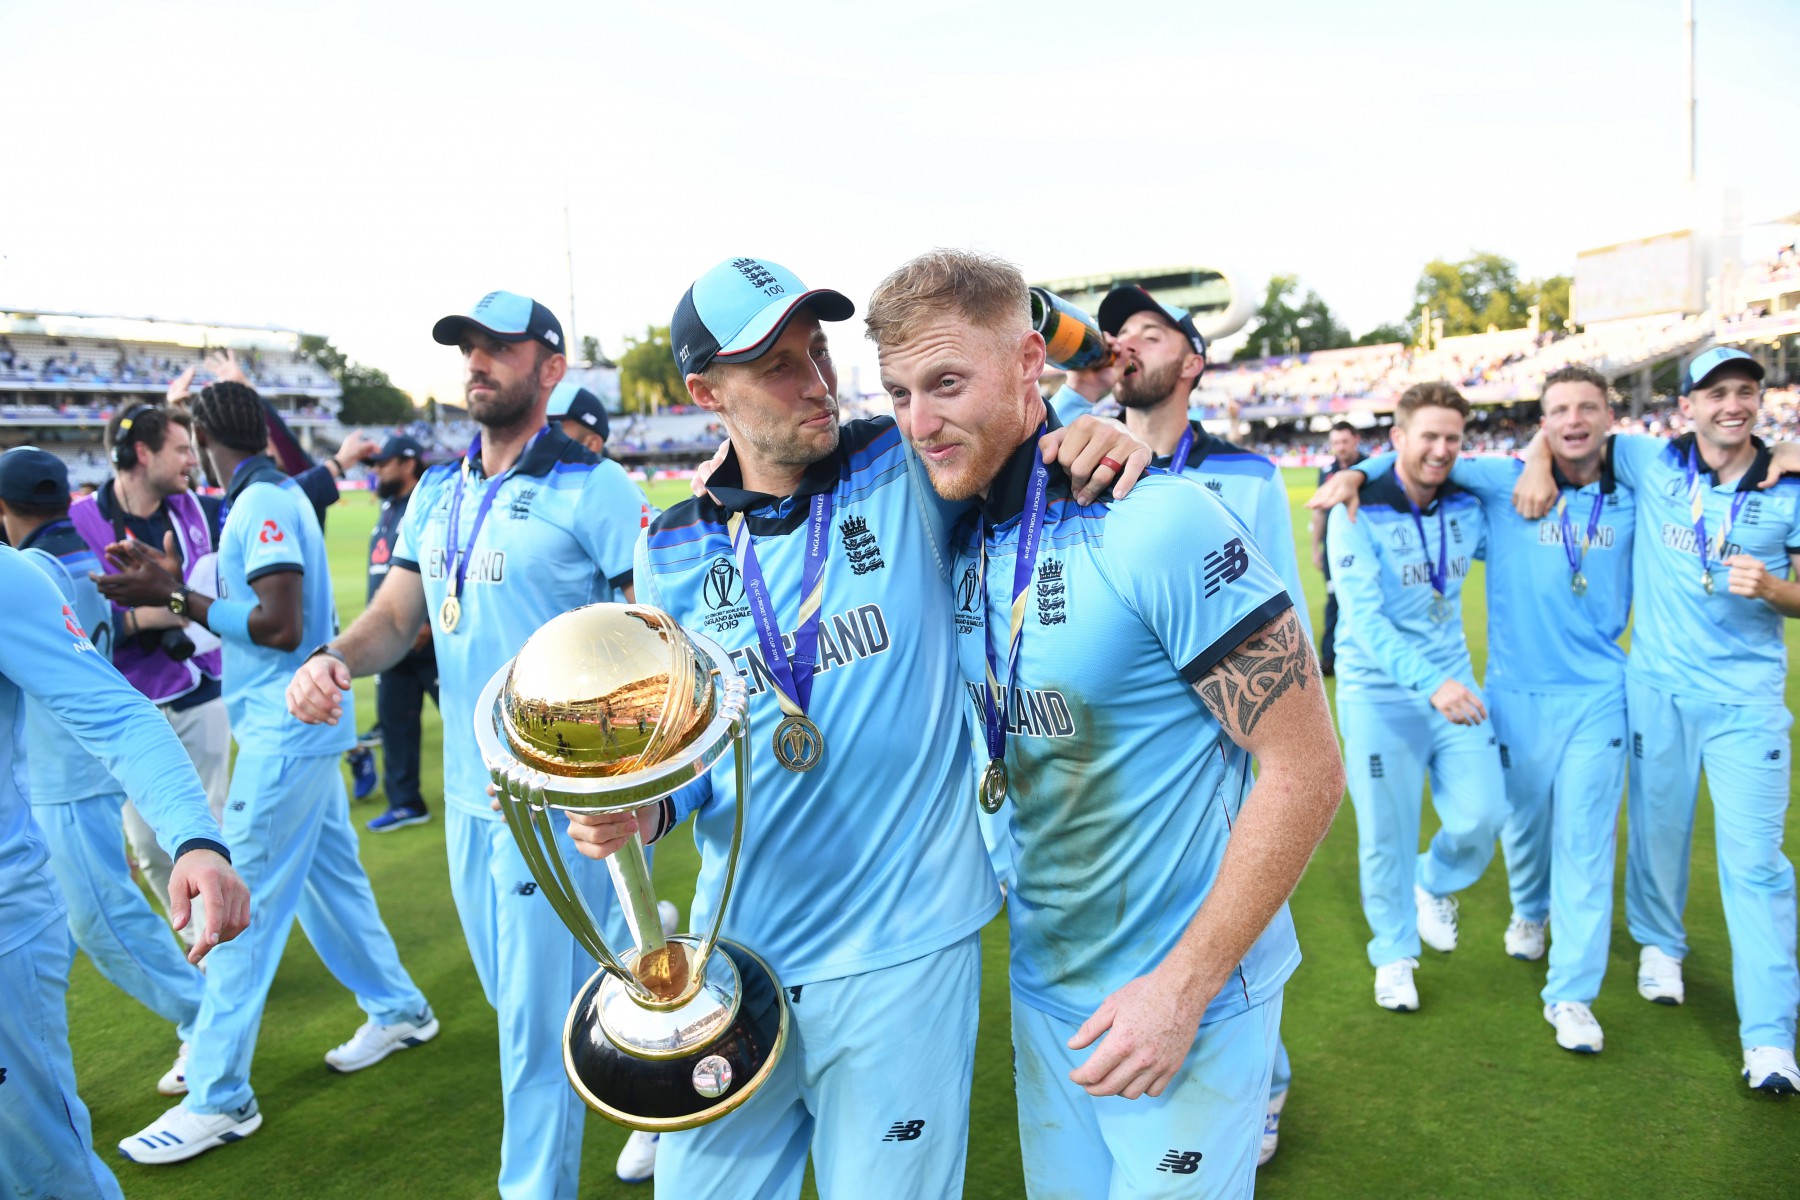 , Sports Personality champ Ben Stokes was always loved by his team-mates, who helped him through dark times